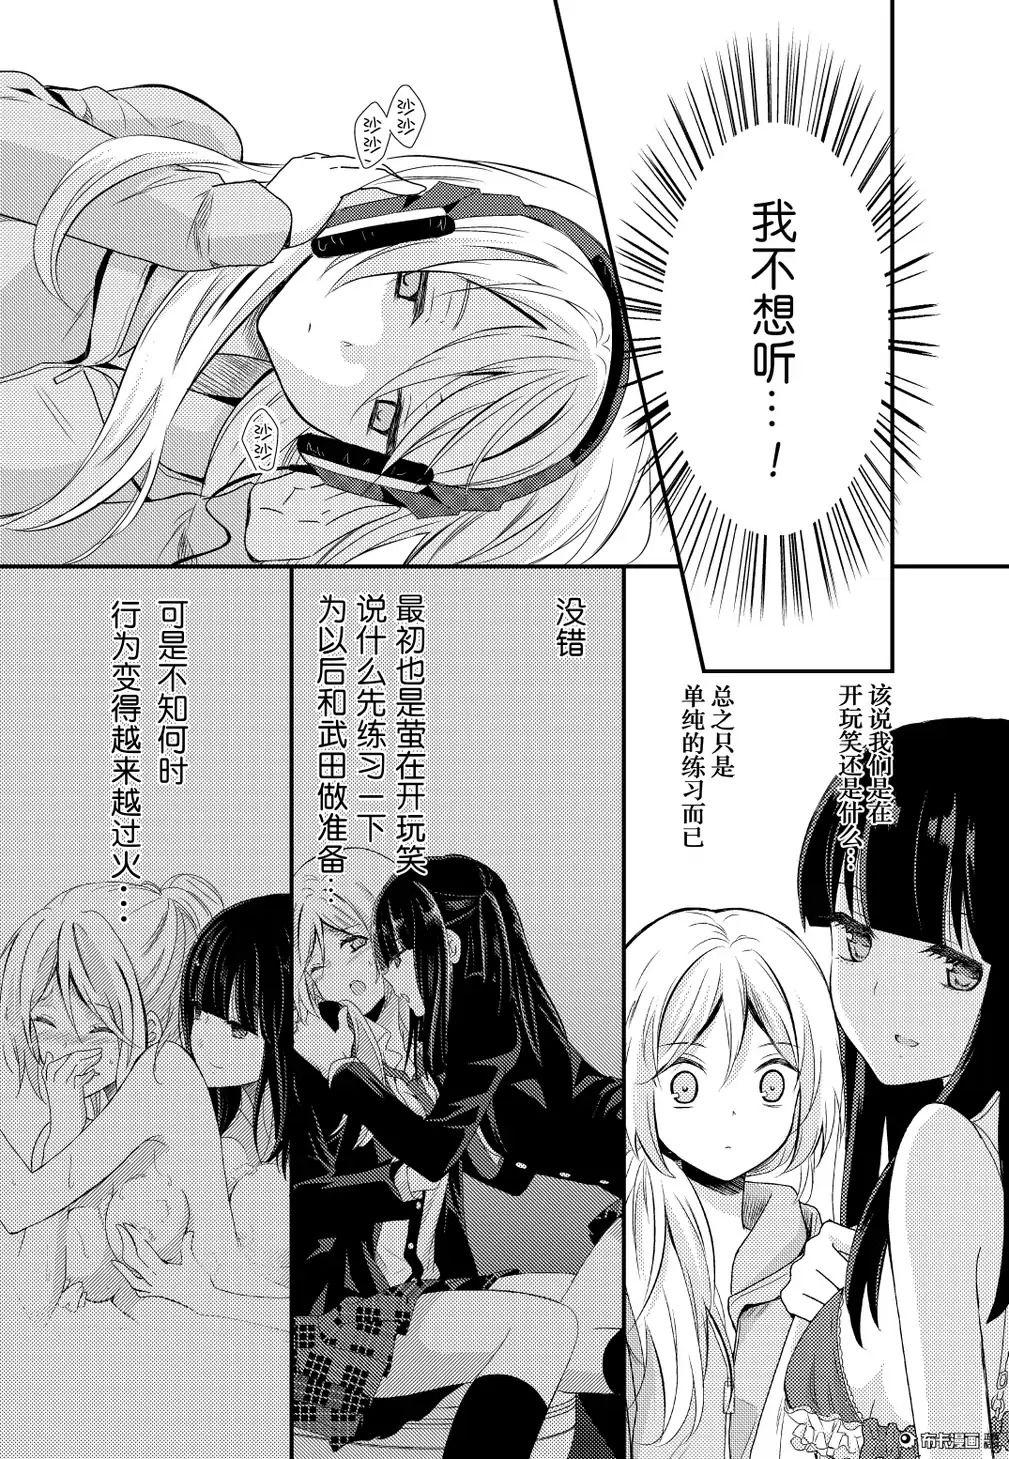 Tongue 捏造trap9 18 Year Old - Page 9